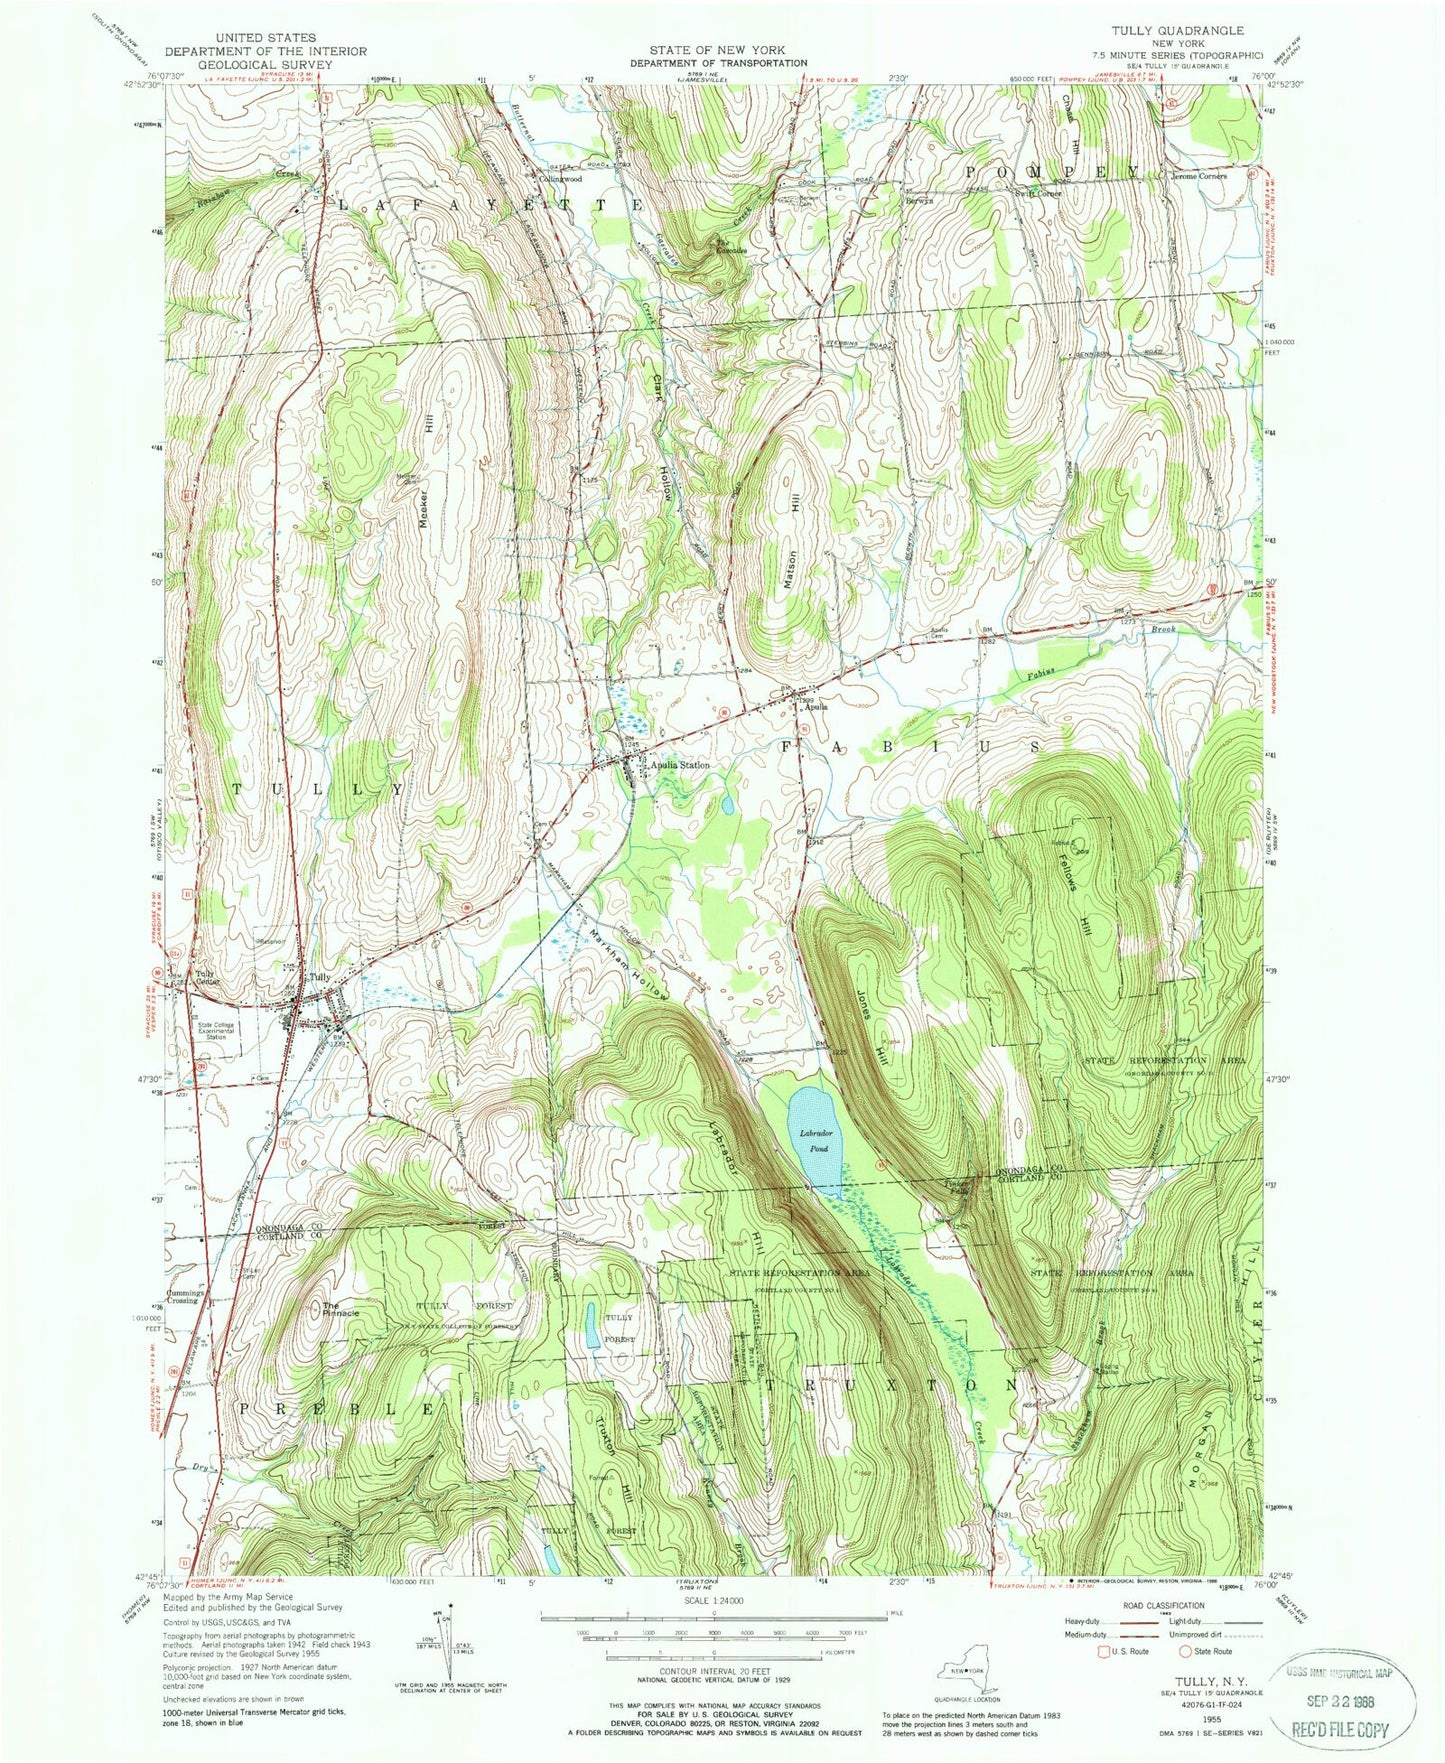 Classic USGS Tully New York 7.5'x7.5' Topo Map Image